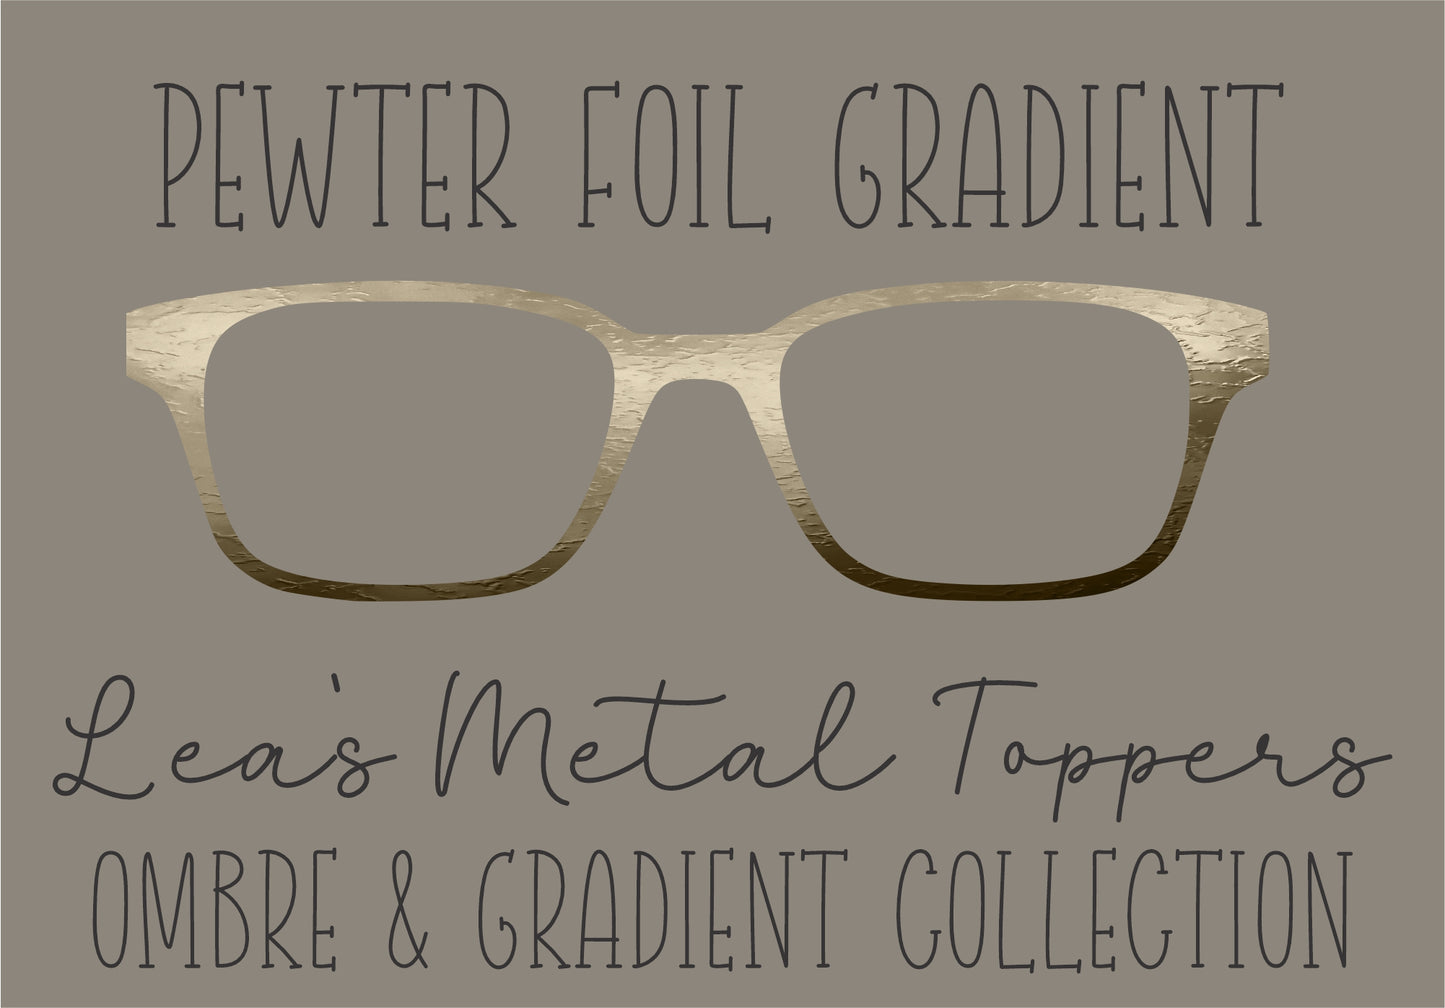 PEWTER FOIL GRADIENT Eyewear Frame Toppers COMES WITH MAGNETS